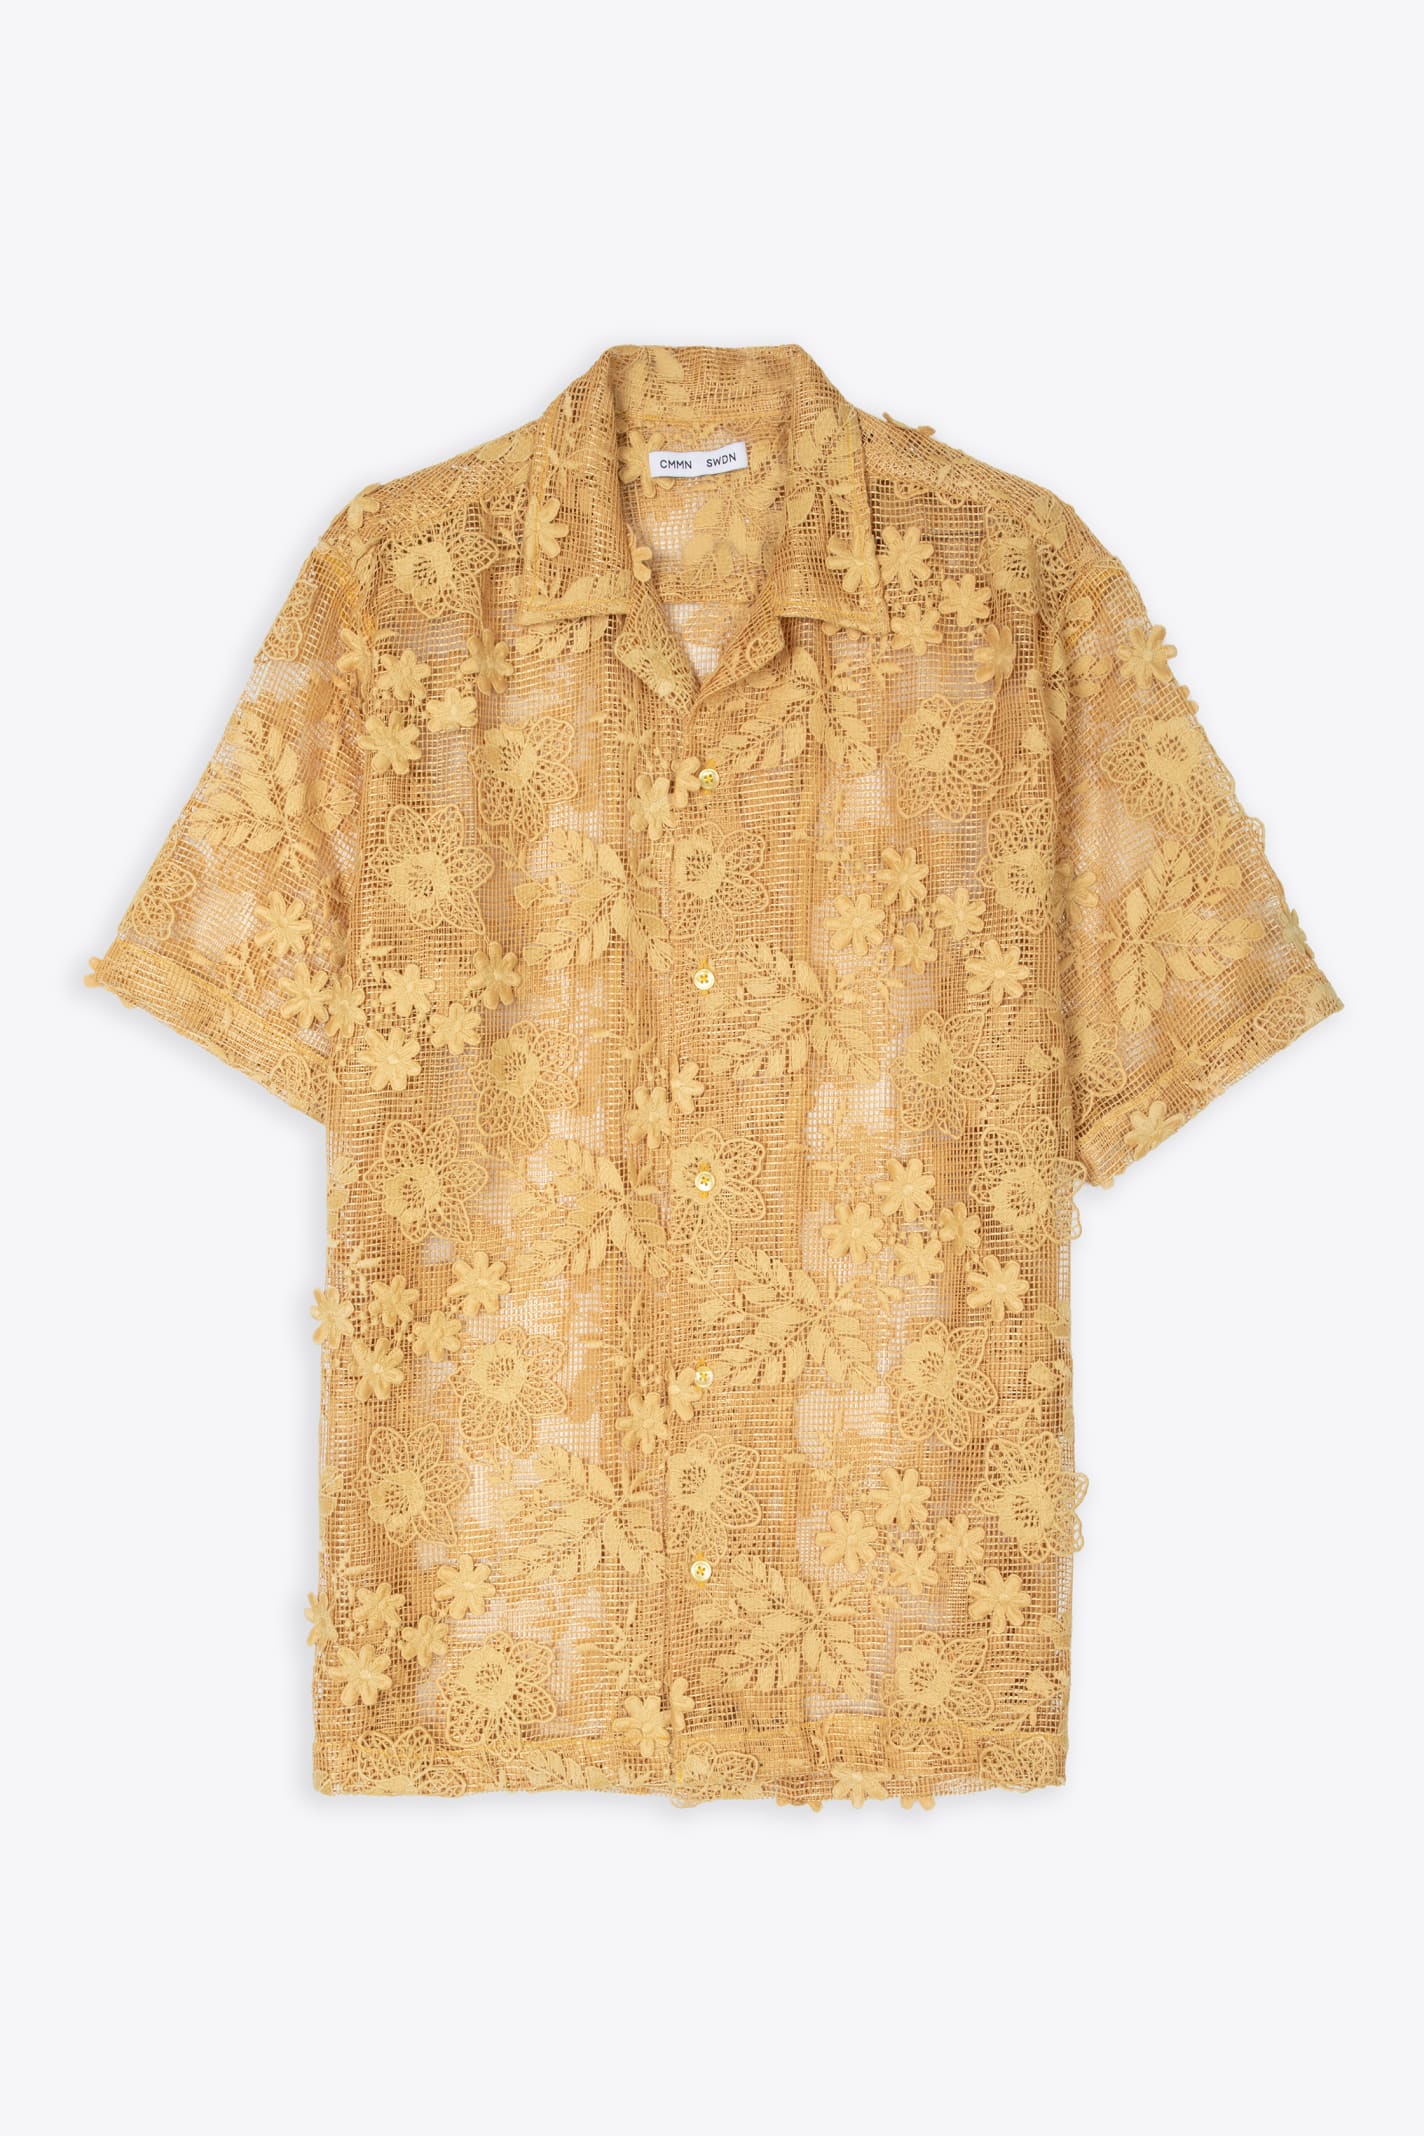 CMMN SWDN SHORT SLEEVE CAMP COLLAR SHIRT IN FLORAL TULLE OCHRE TULLE SHIRT WITH FLORAL EMBROIDERY - DUANE